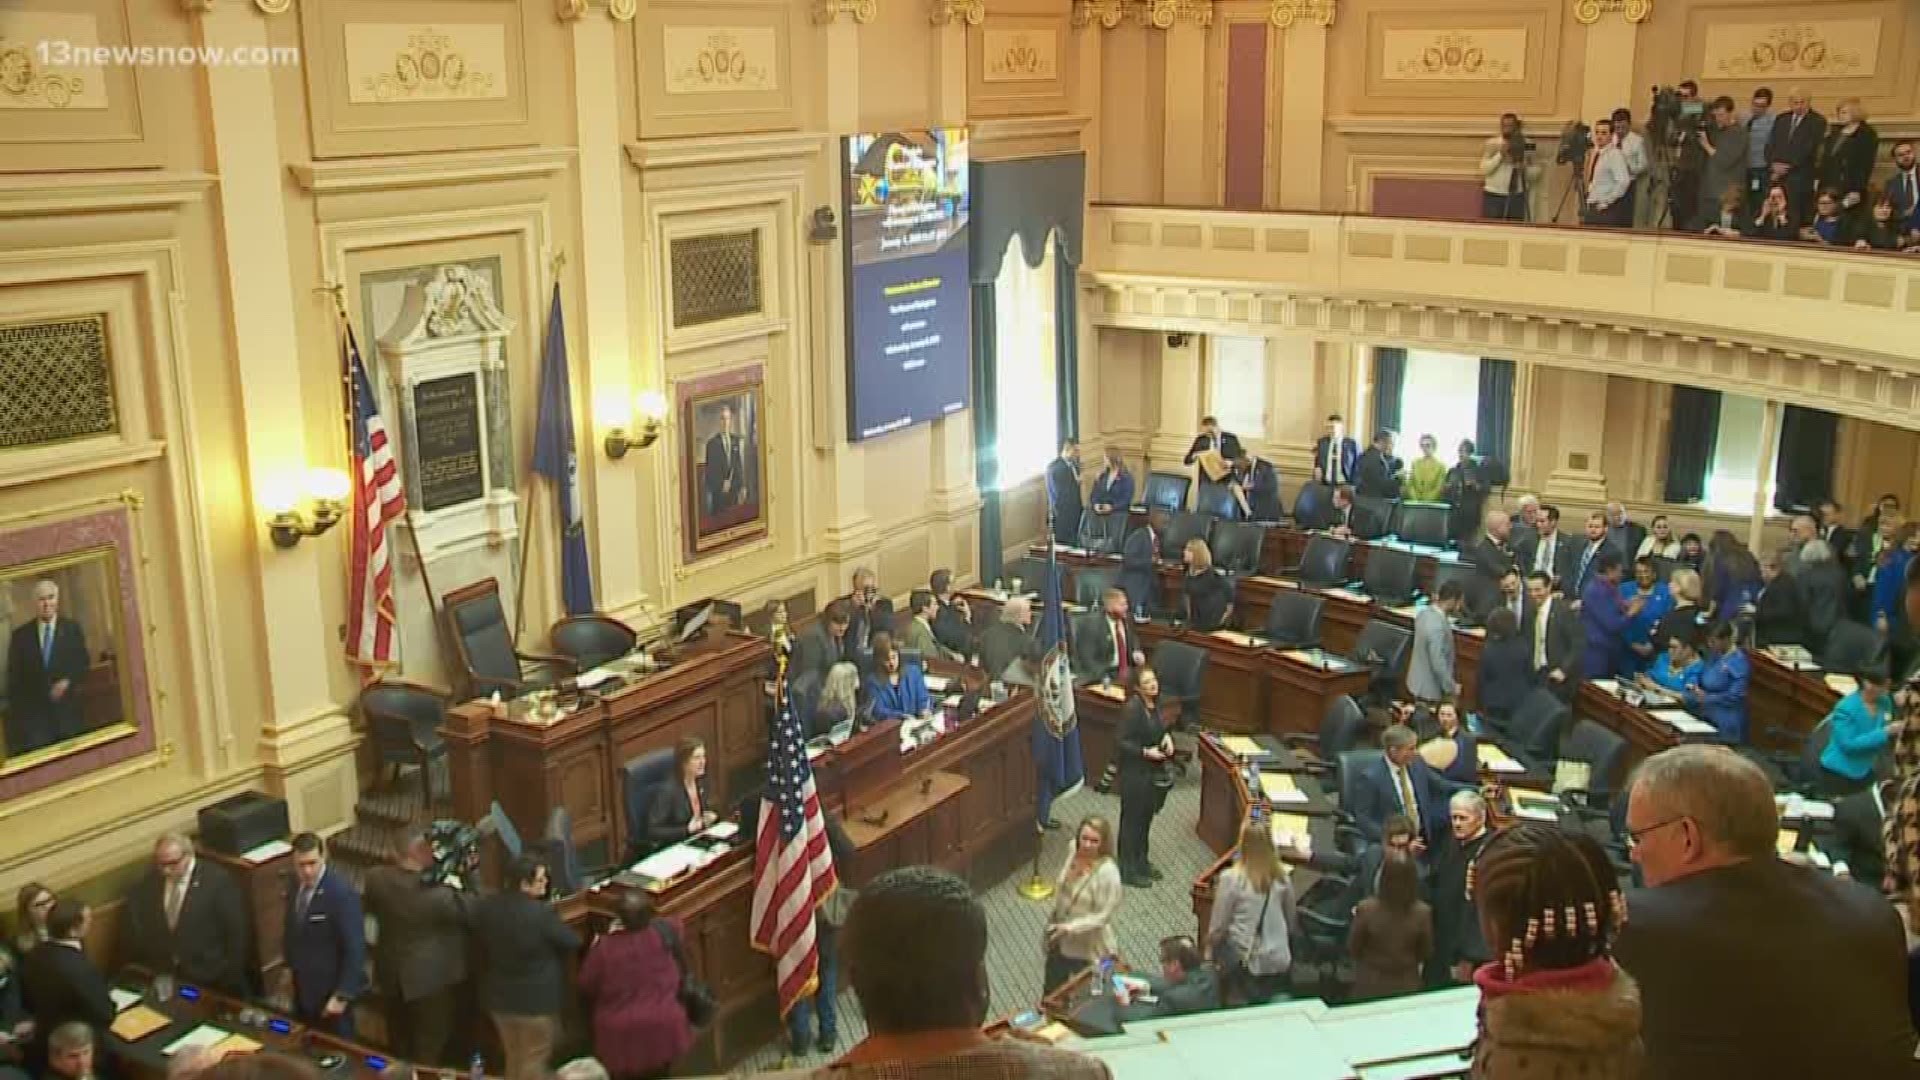 13News Now Jaclyn Lee was in Richmond to see how the first day of the 2020 General Assembly session went in a Democratically-controlled statehouse.